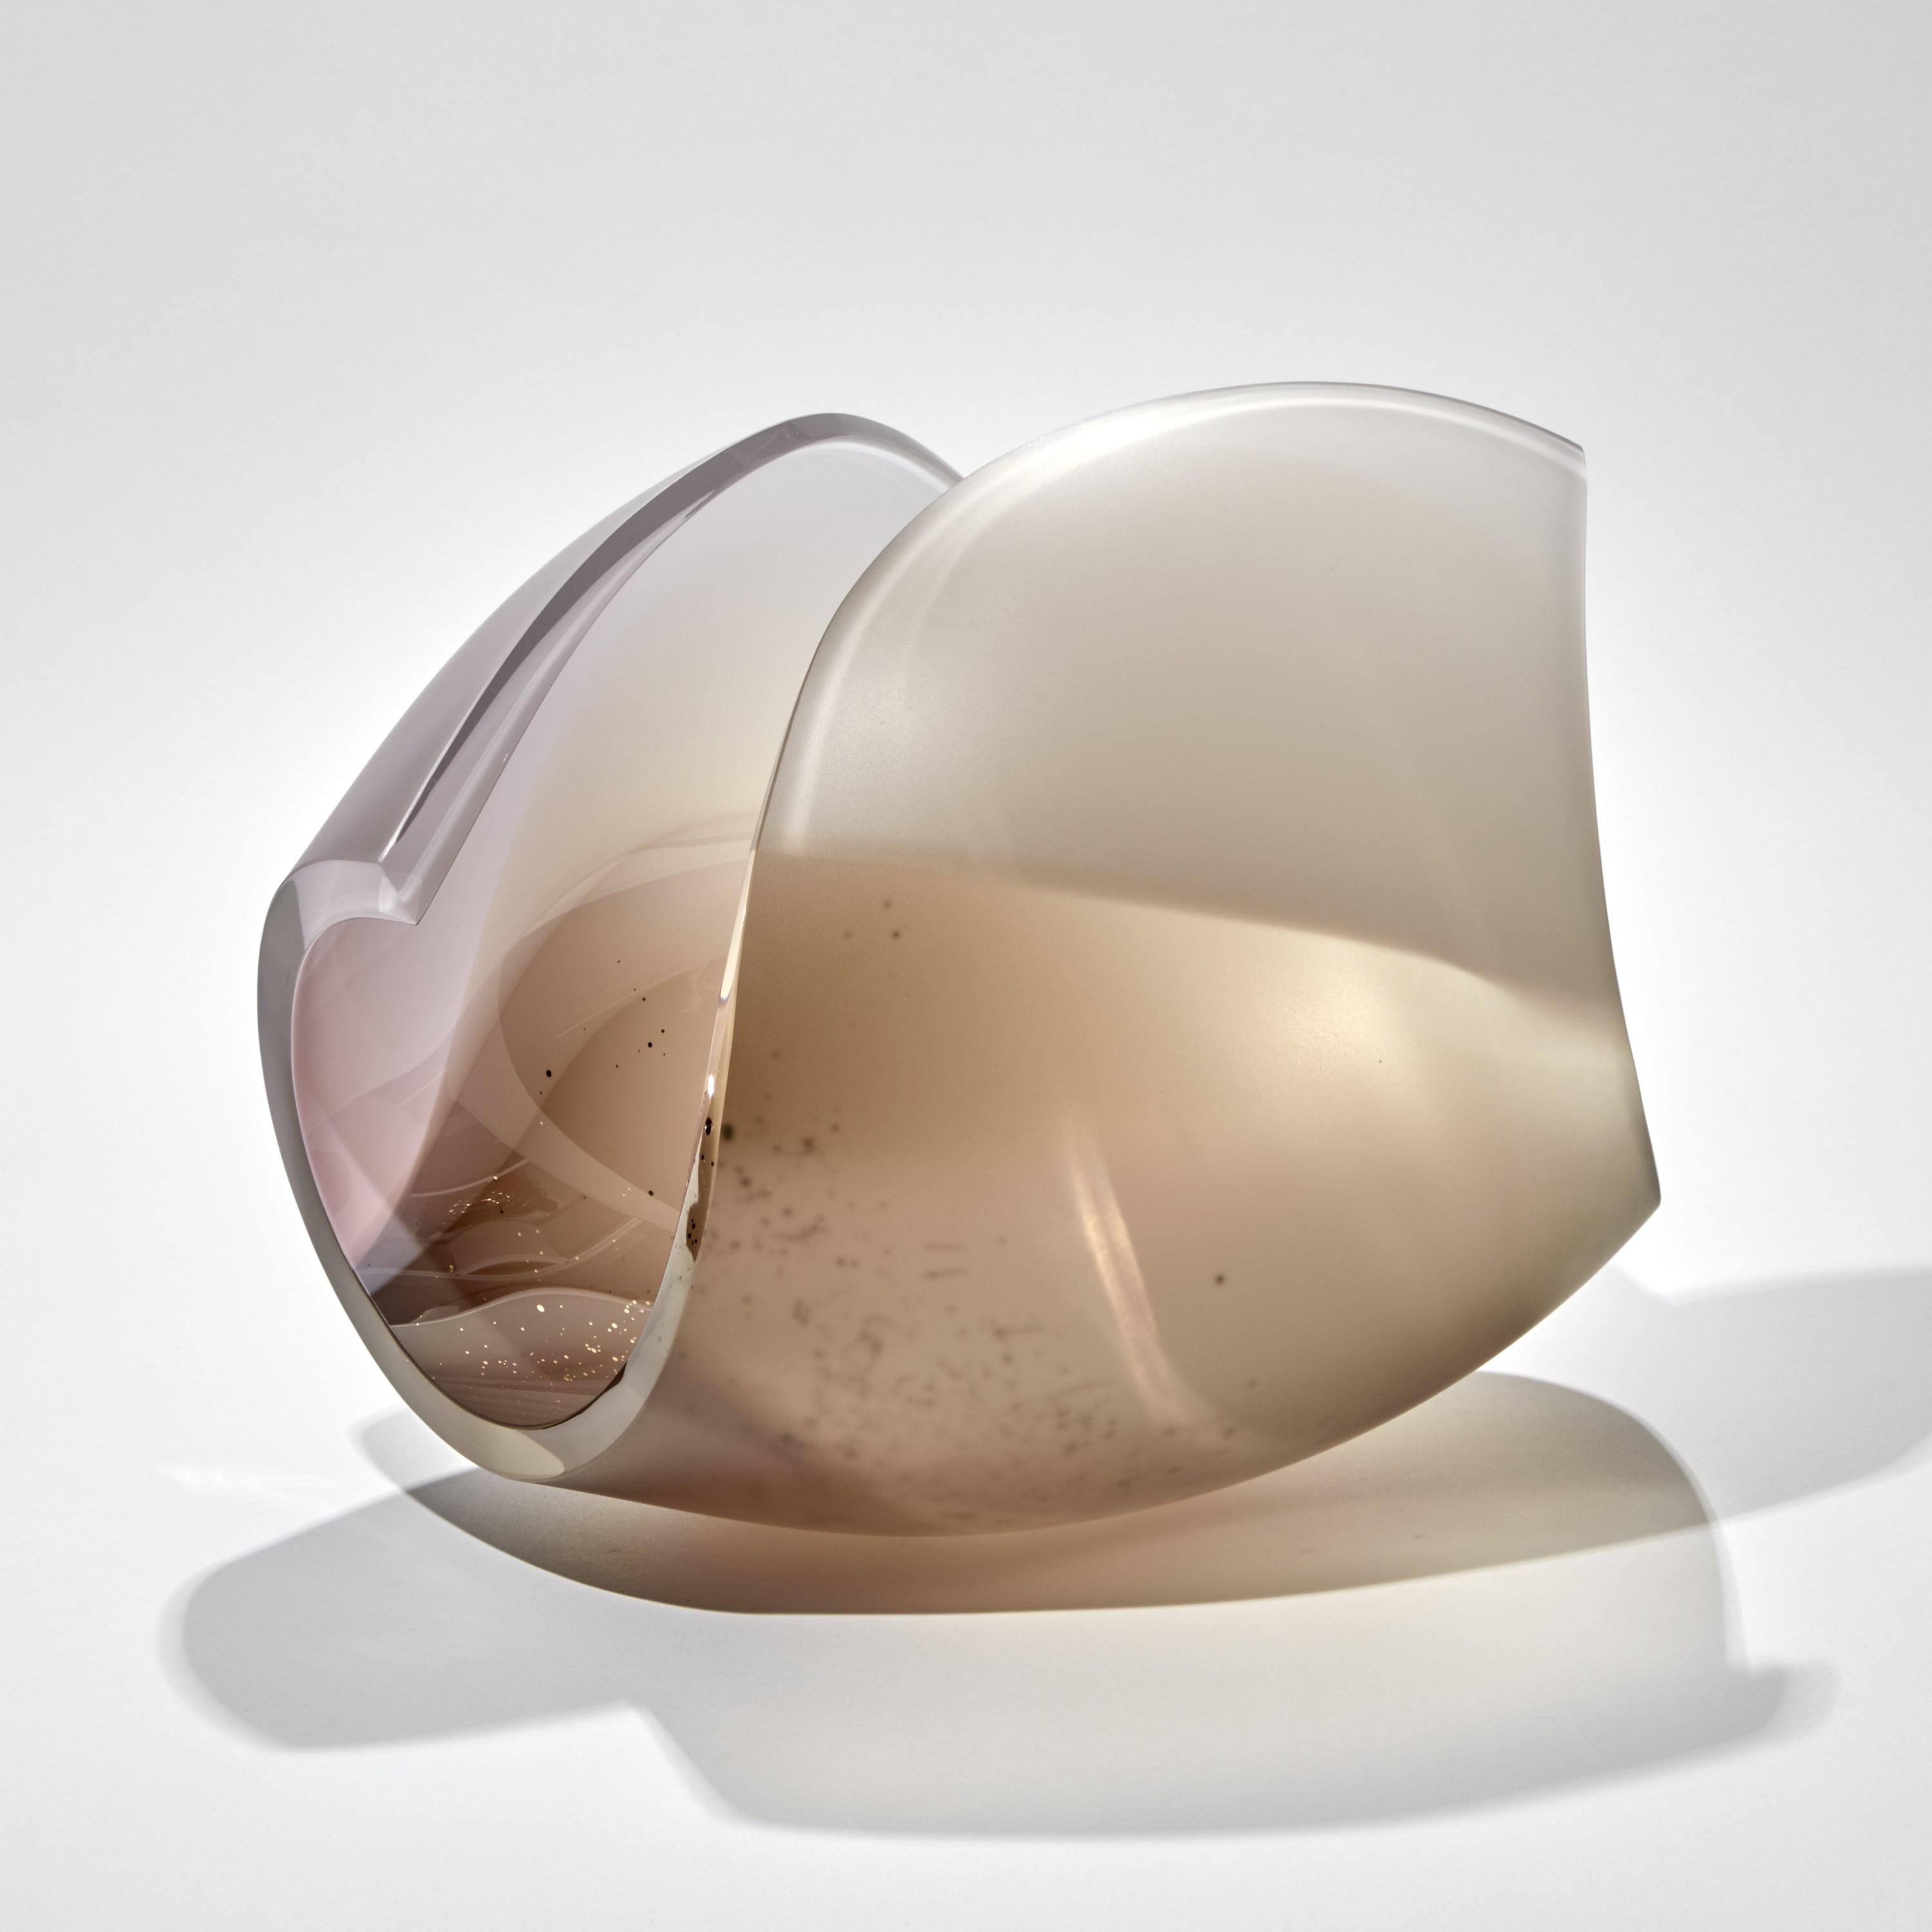 'Planet in Pink, Bronze & Gold' is a unique glass sculptural artwork and centerpiece by the Swedish artist Lena Bergström. This piece is from an ongoing collection of works called the Planets which the artist has revisited several times throughout